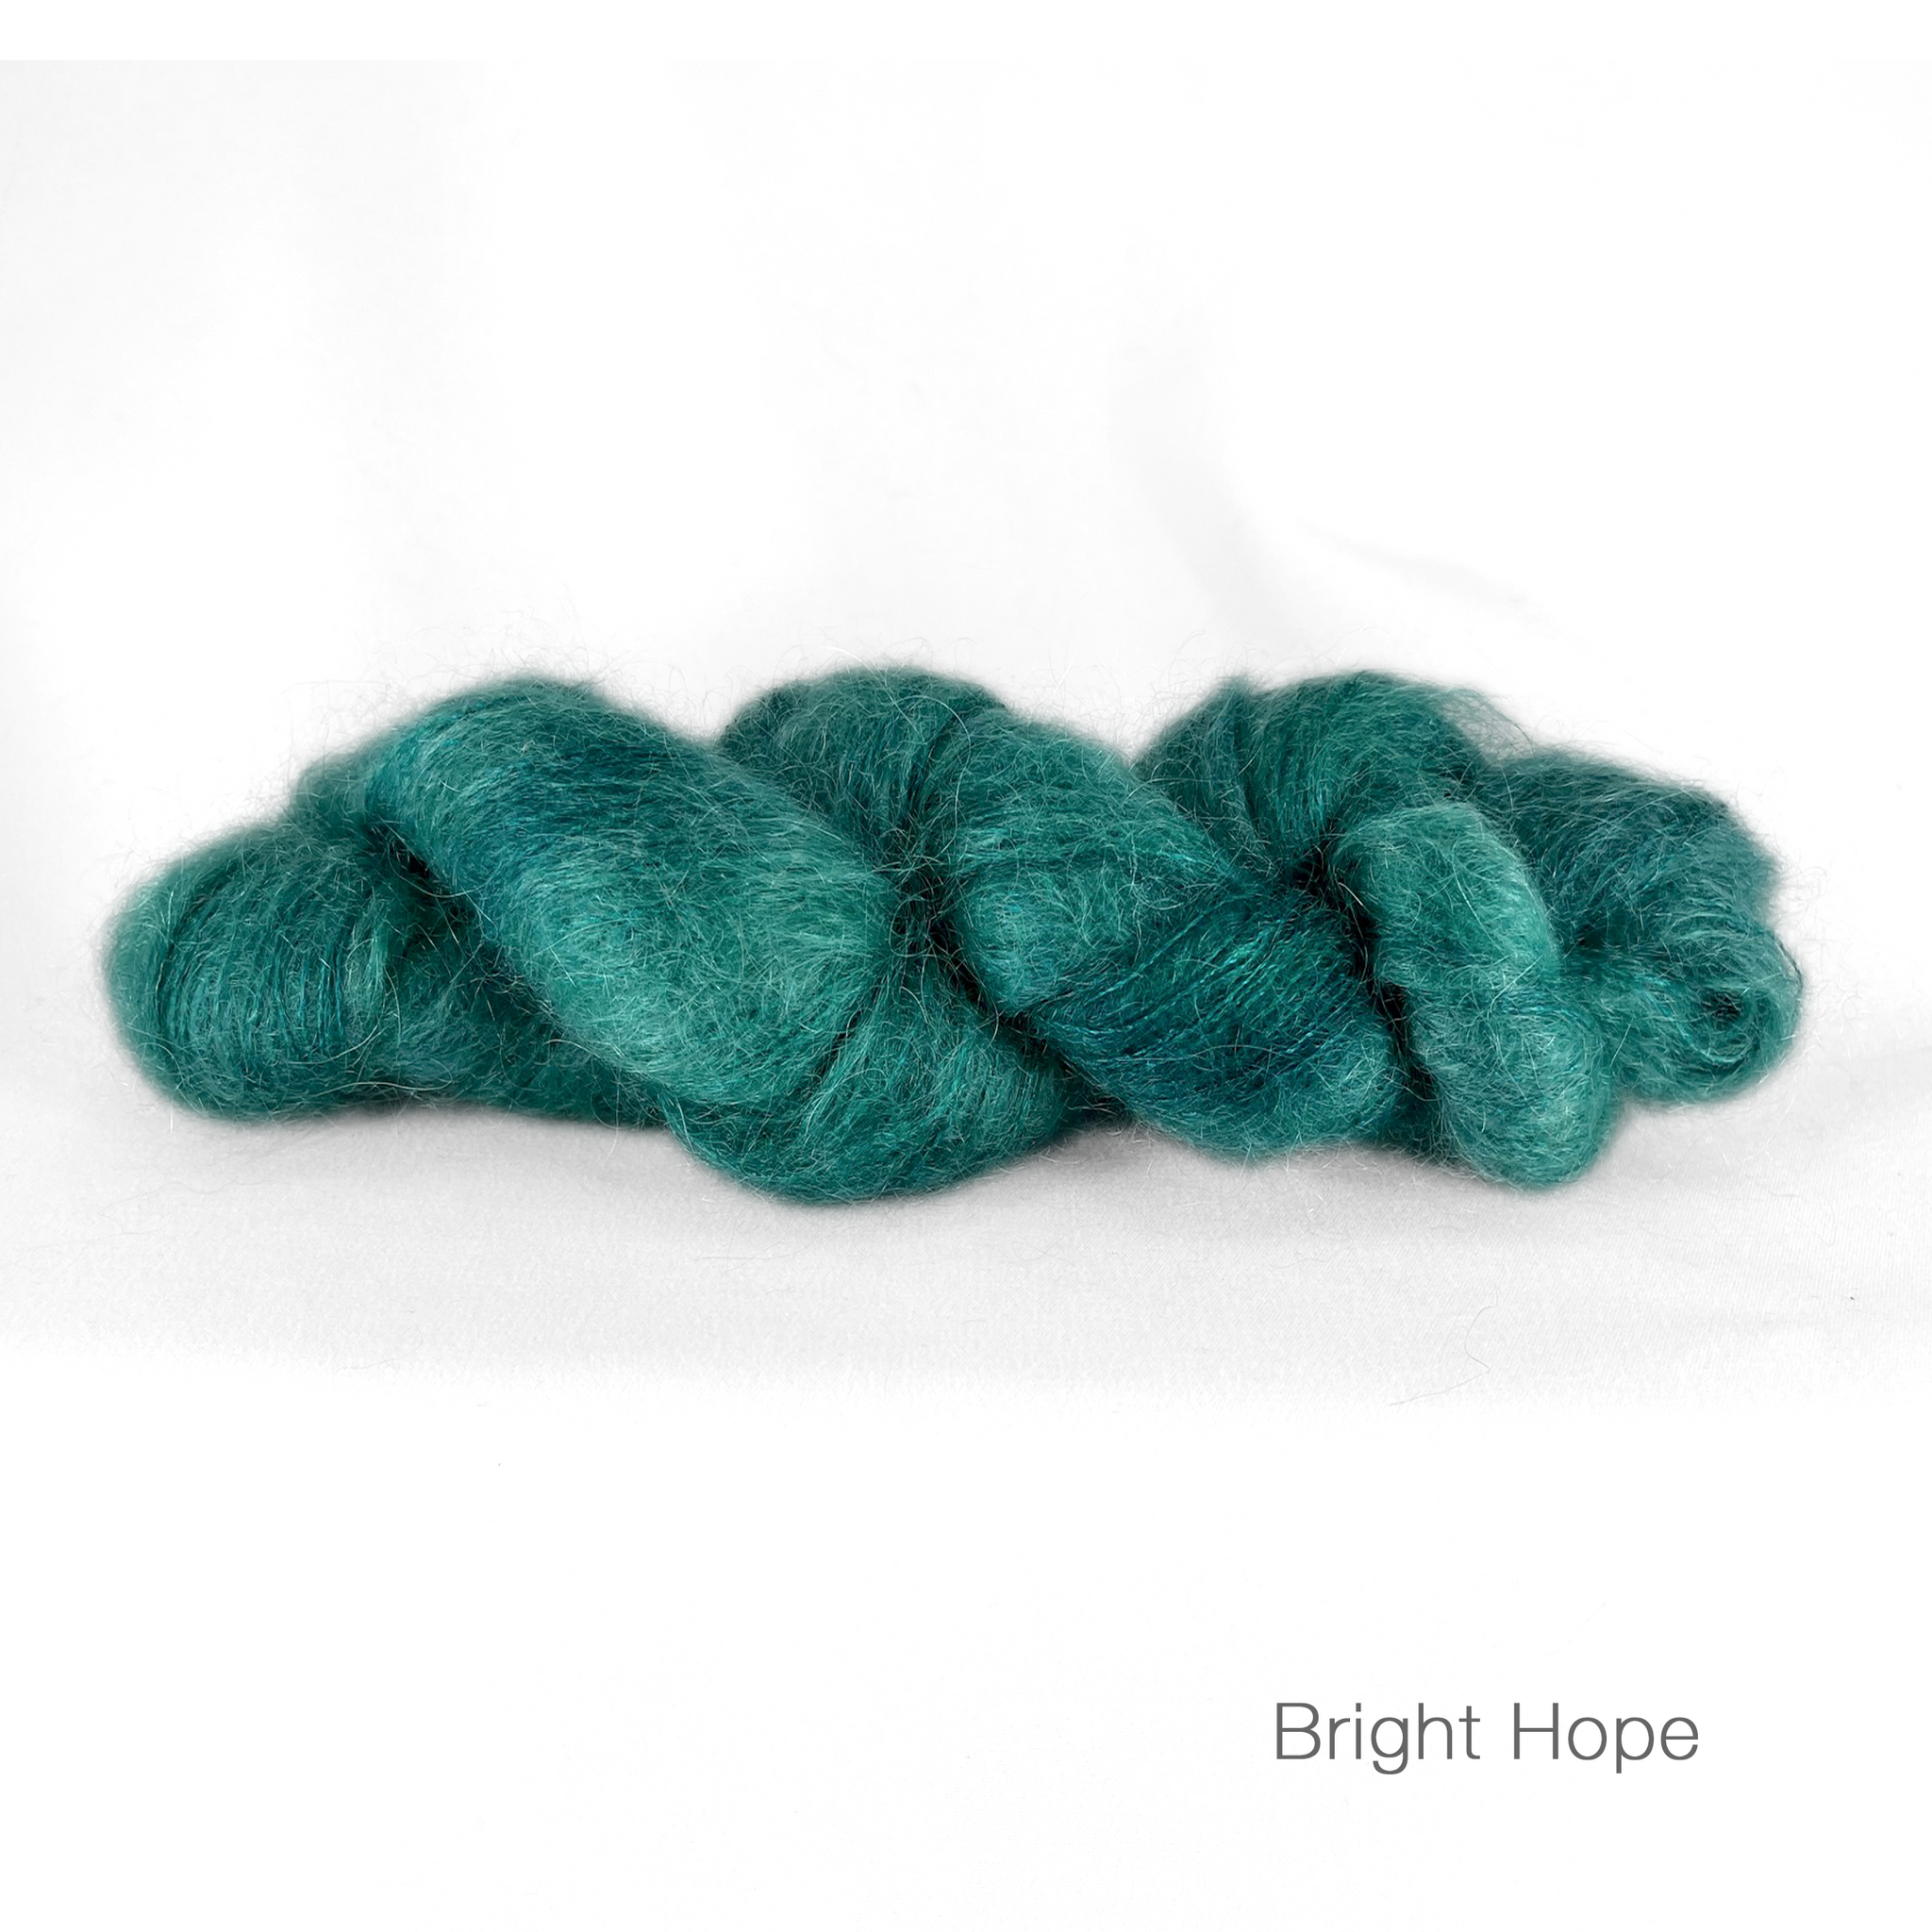 IAM Hygge Superkid Mohair and Mulberry Silk – Inspire a Mind / IAM